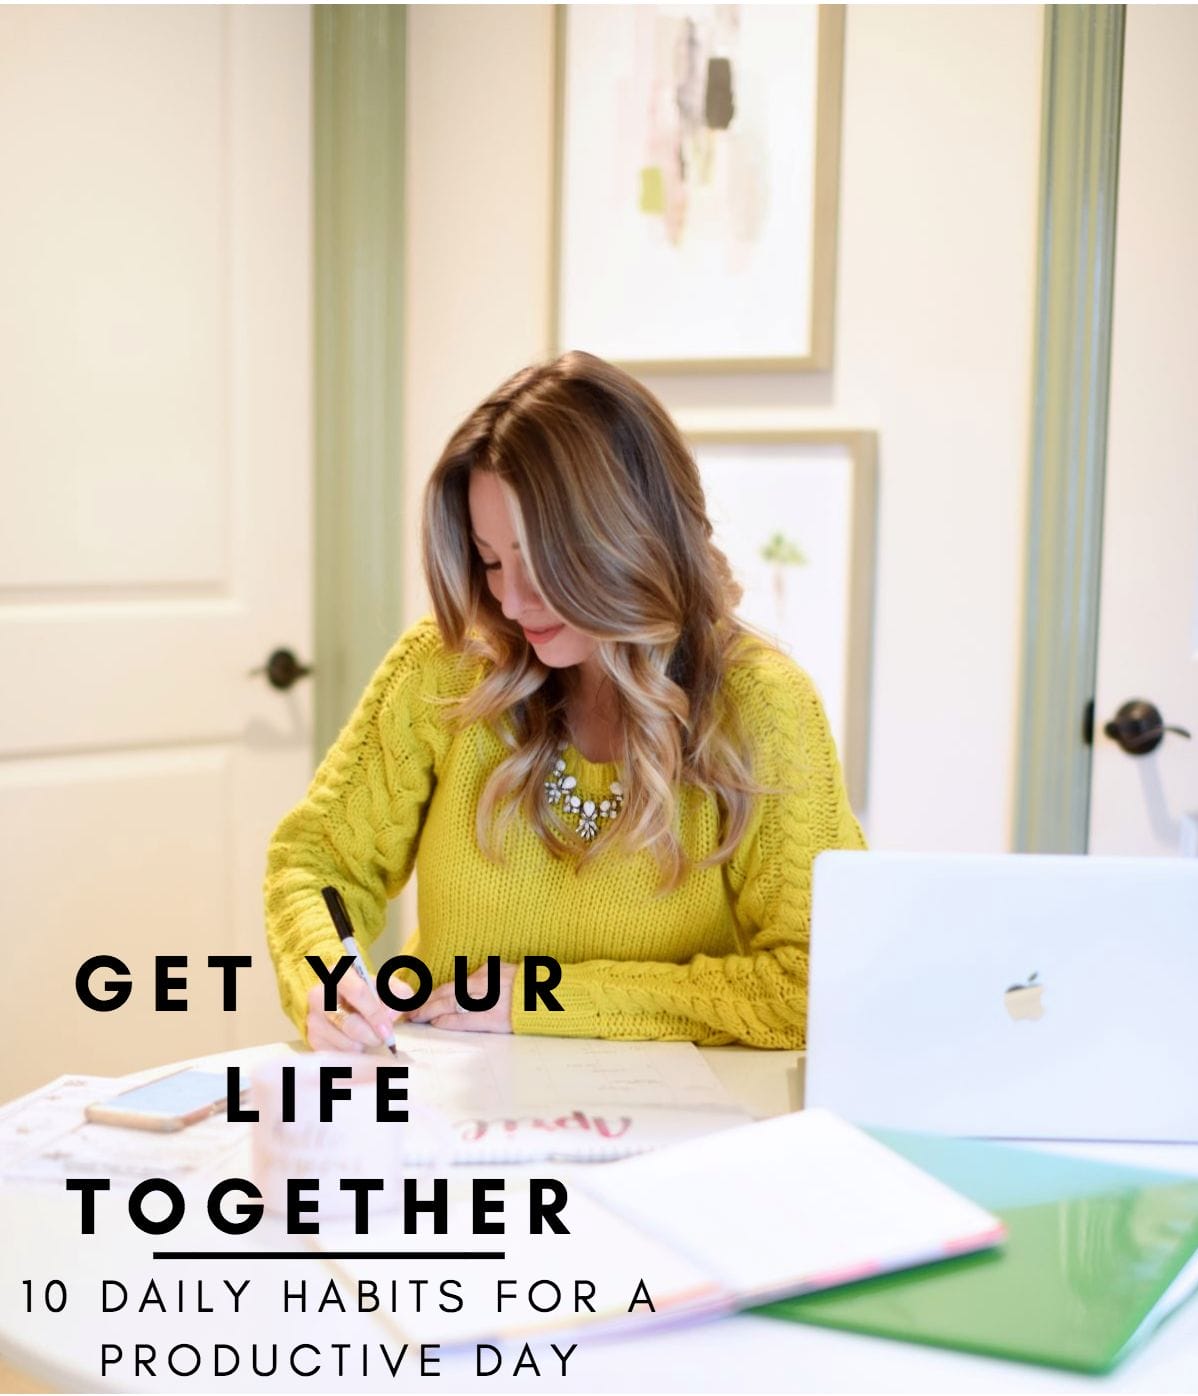 Get Your Life Together | 10 Daily Habits for a Productive Day